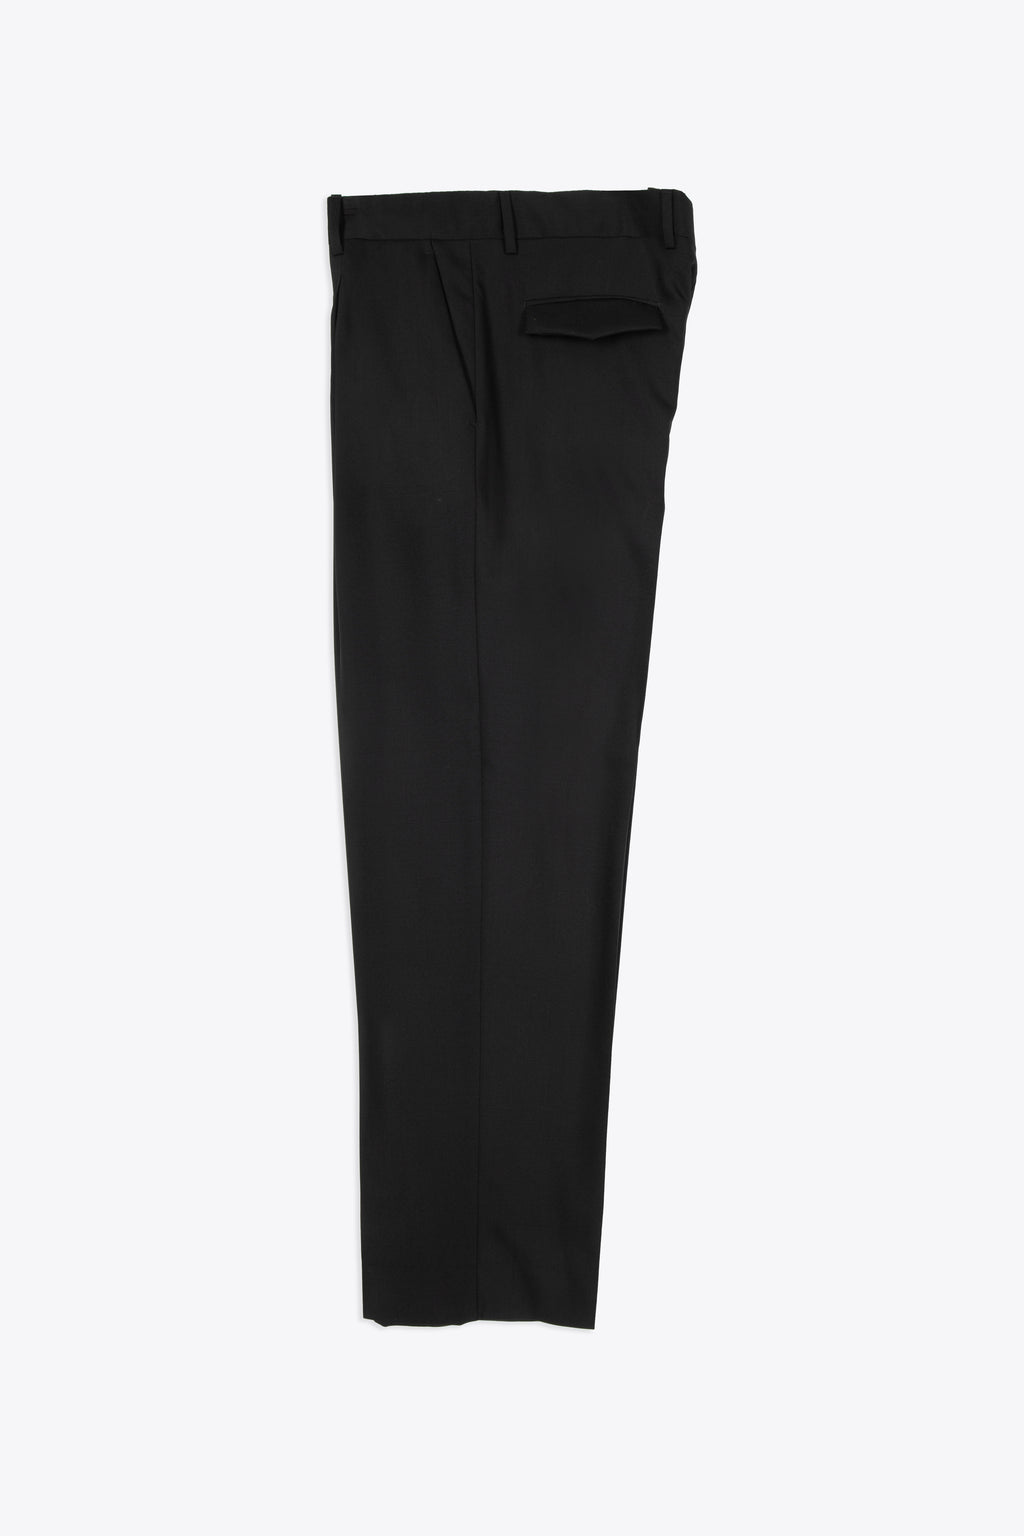 alt-image__Black-wool-tailored-pant-with-front-pleat---Vincent-Timisoara-Trousers-